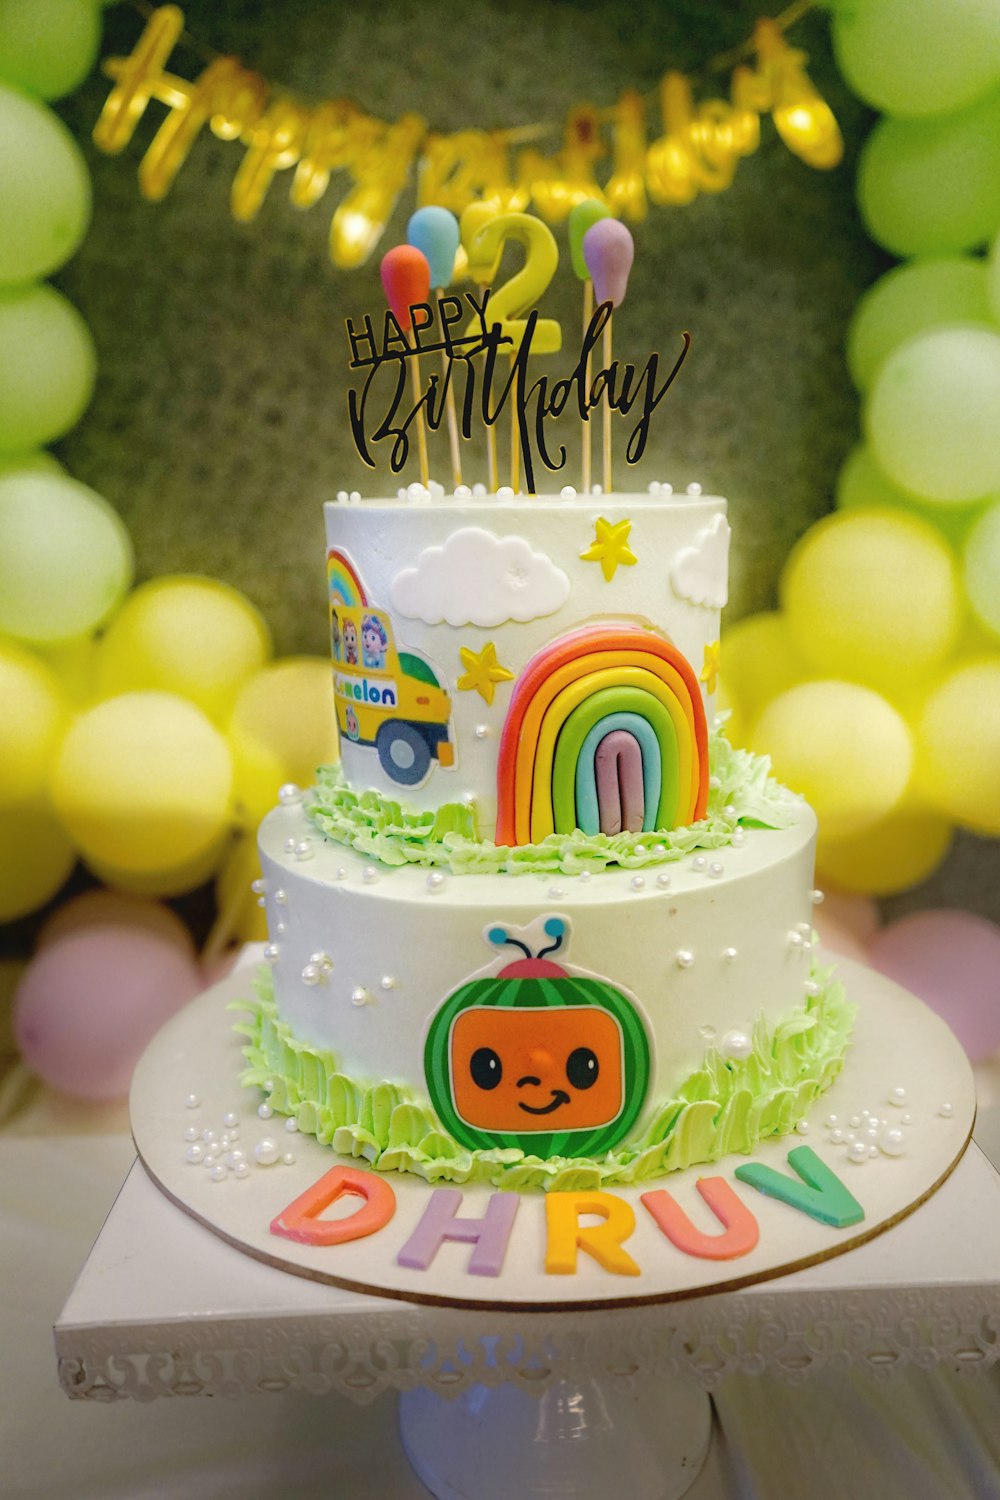 a birthday cake decorated with a rainbow theme